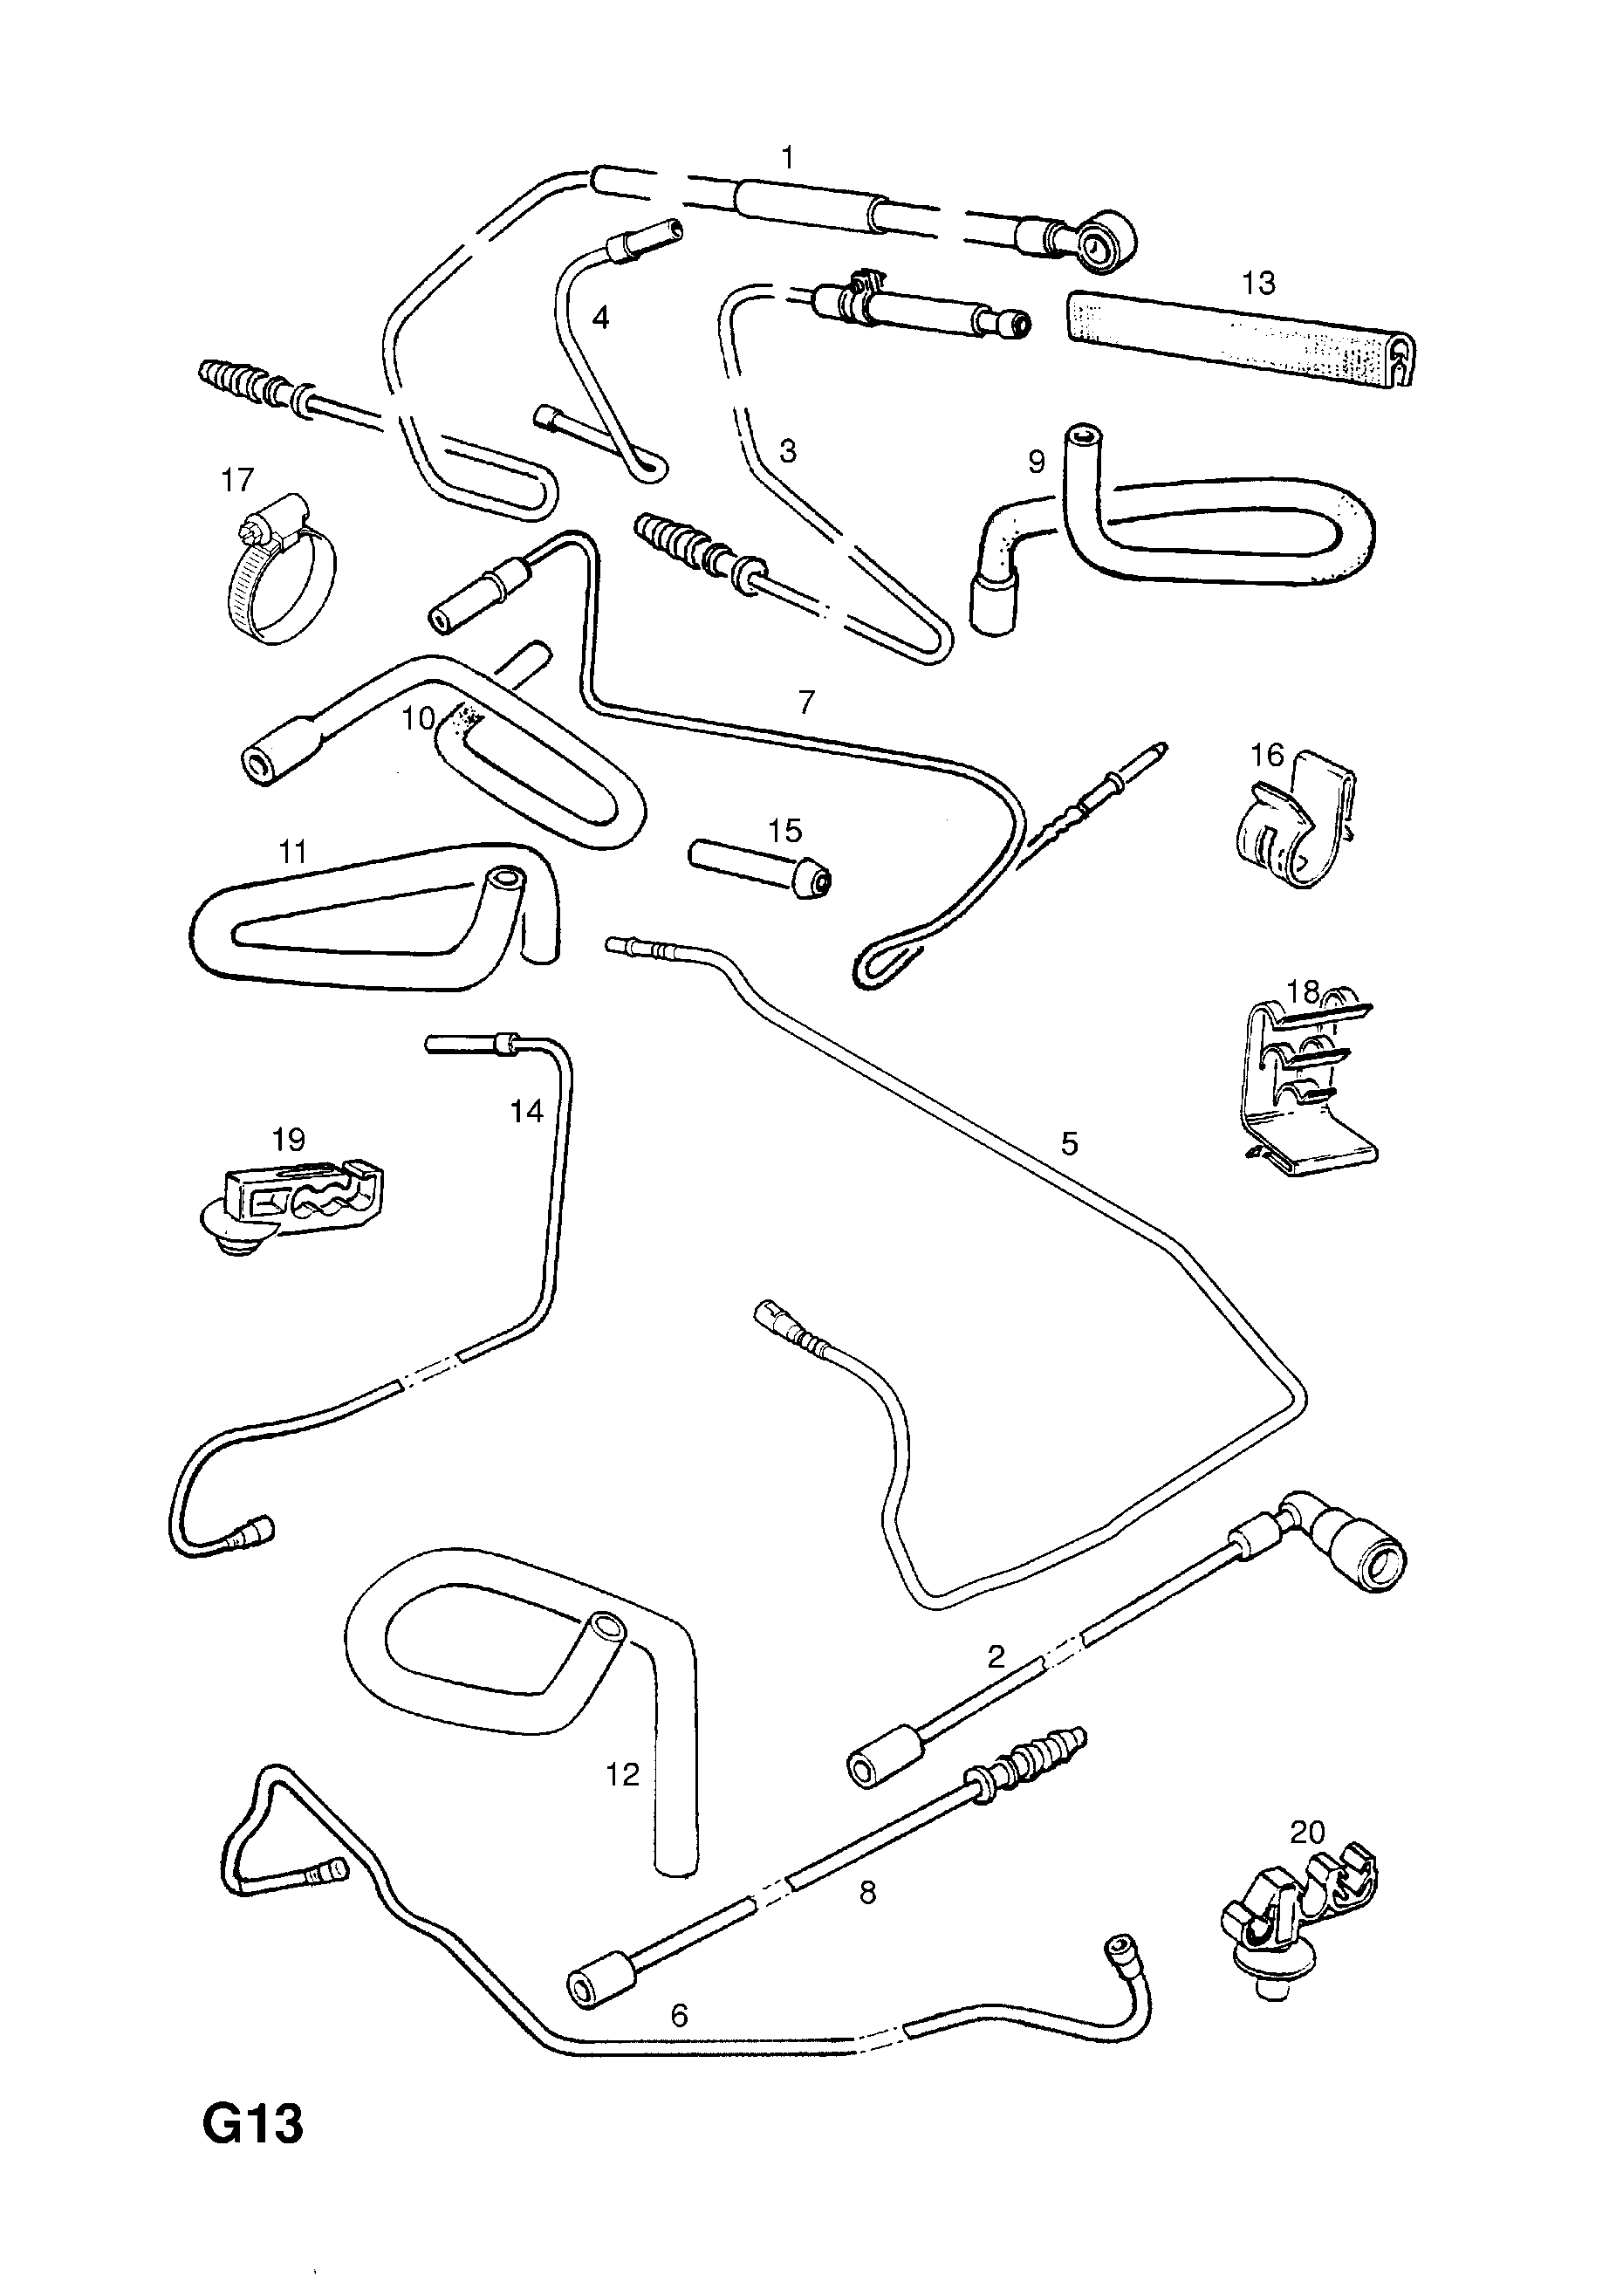 FUEL PIPES AND FITTINGS (CONTD.) <small><i>[17D[LU7],X17D[2H7] ENGINES COMBO,HATCH,VAN (71,73,78,79,F25,F08,F68,M68)]</i></small>